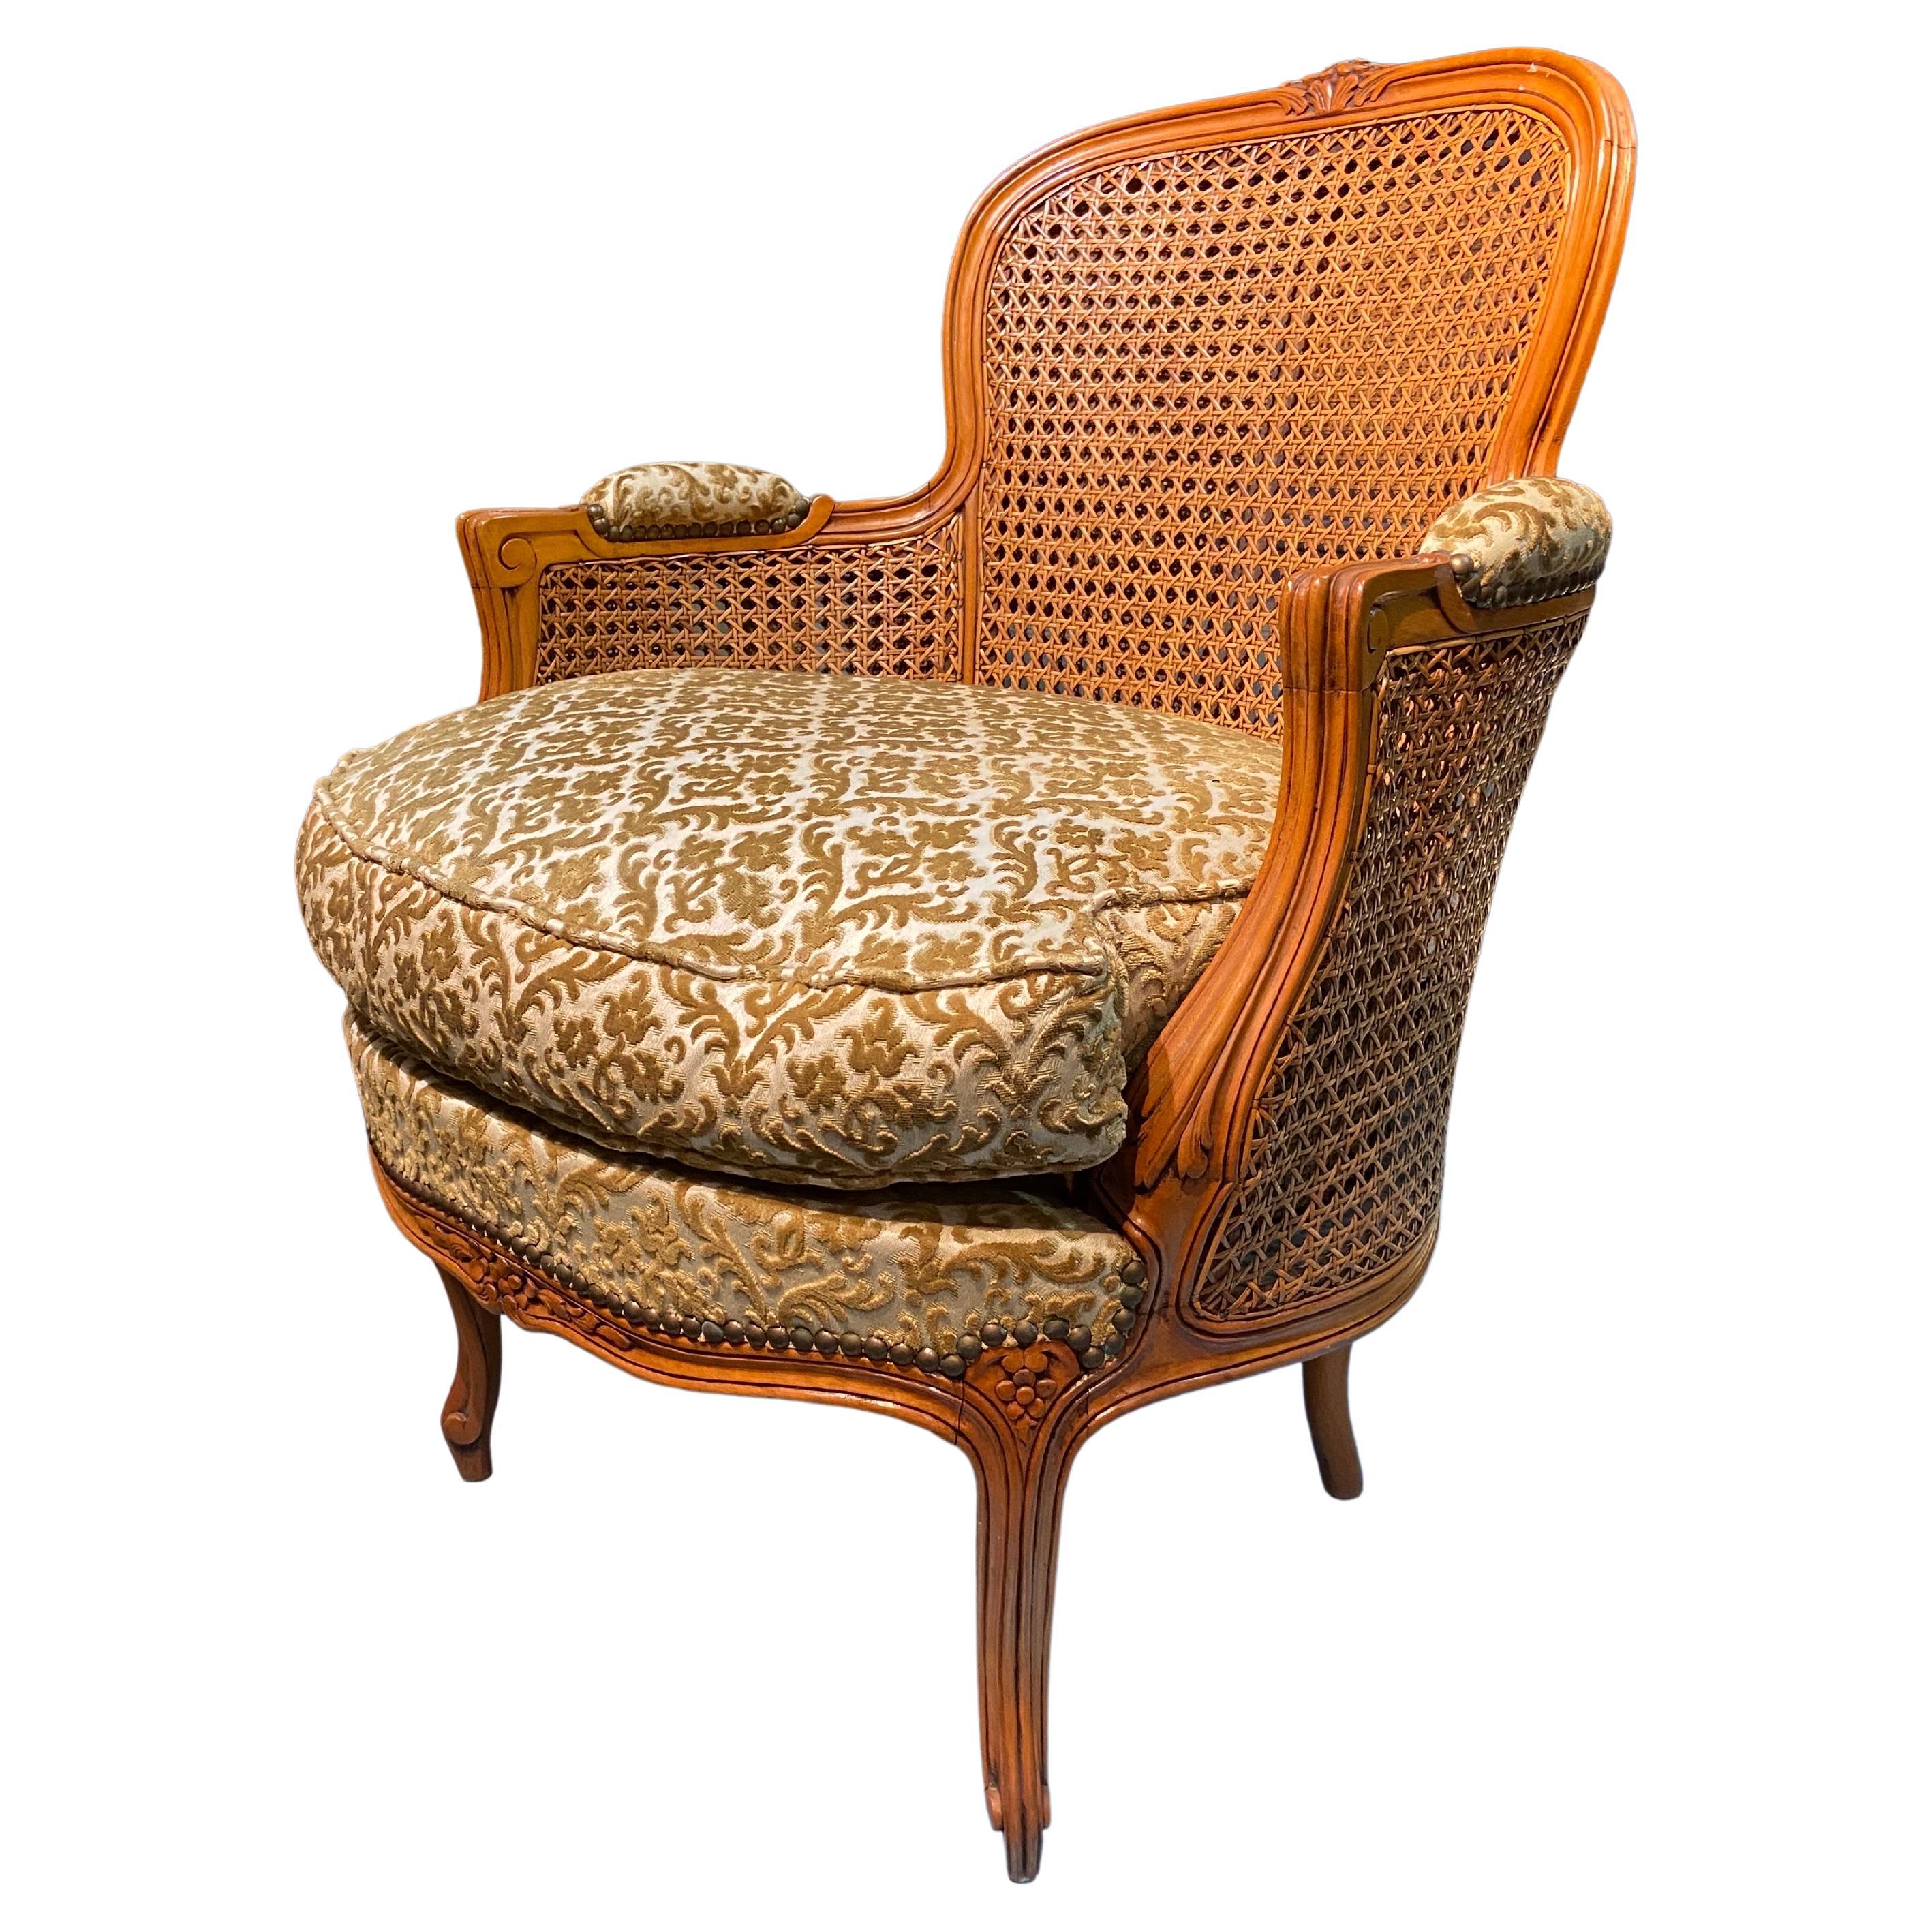 19th Century French Round Bergere Chair in Hand Carved Walnut Wood with Cane